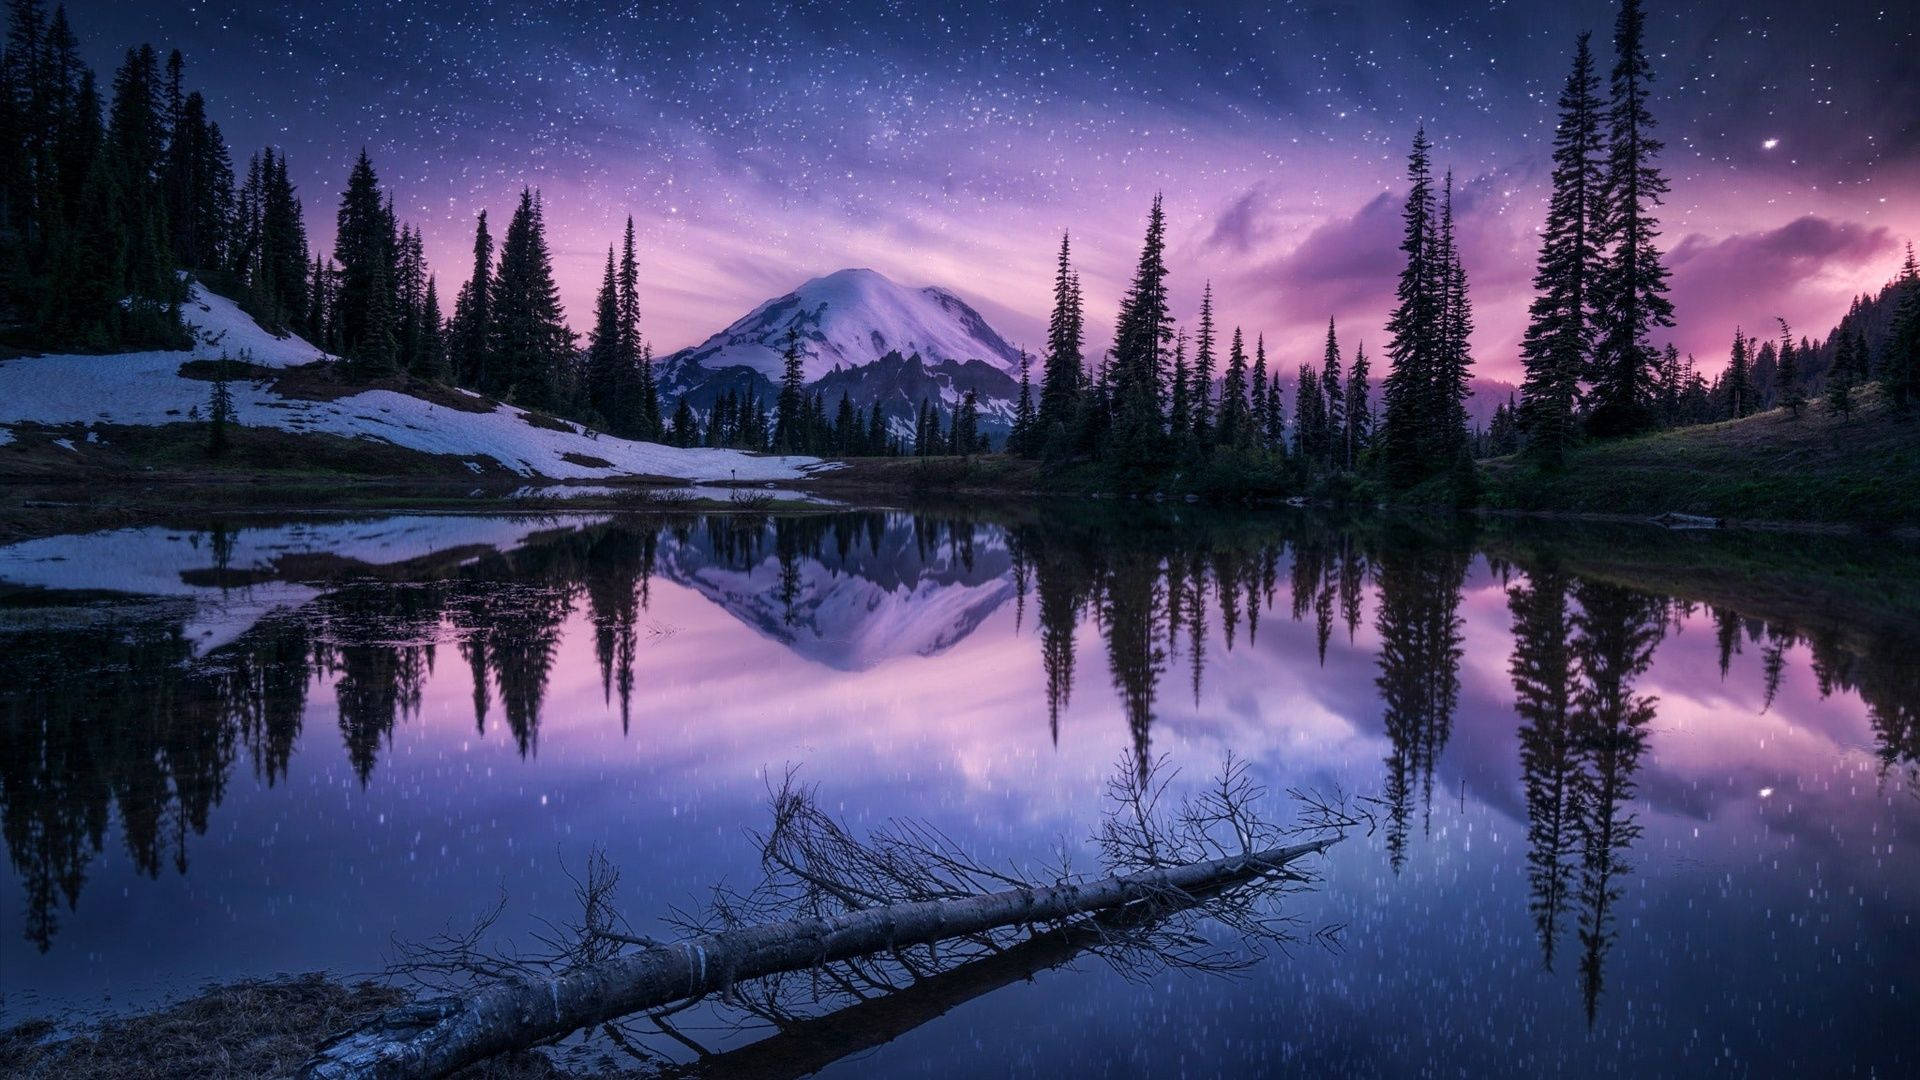 A purple and pink sky over a snow capped mountain with trees and a lake in the foreground. - Nature, lake